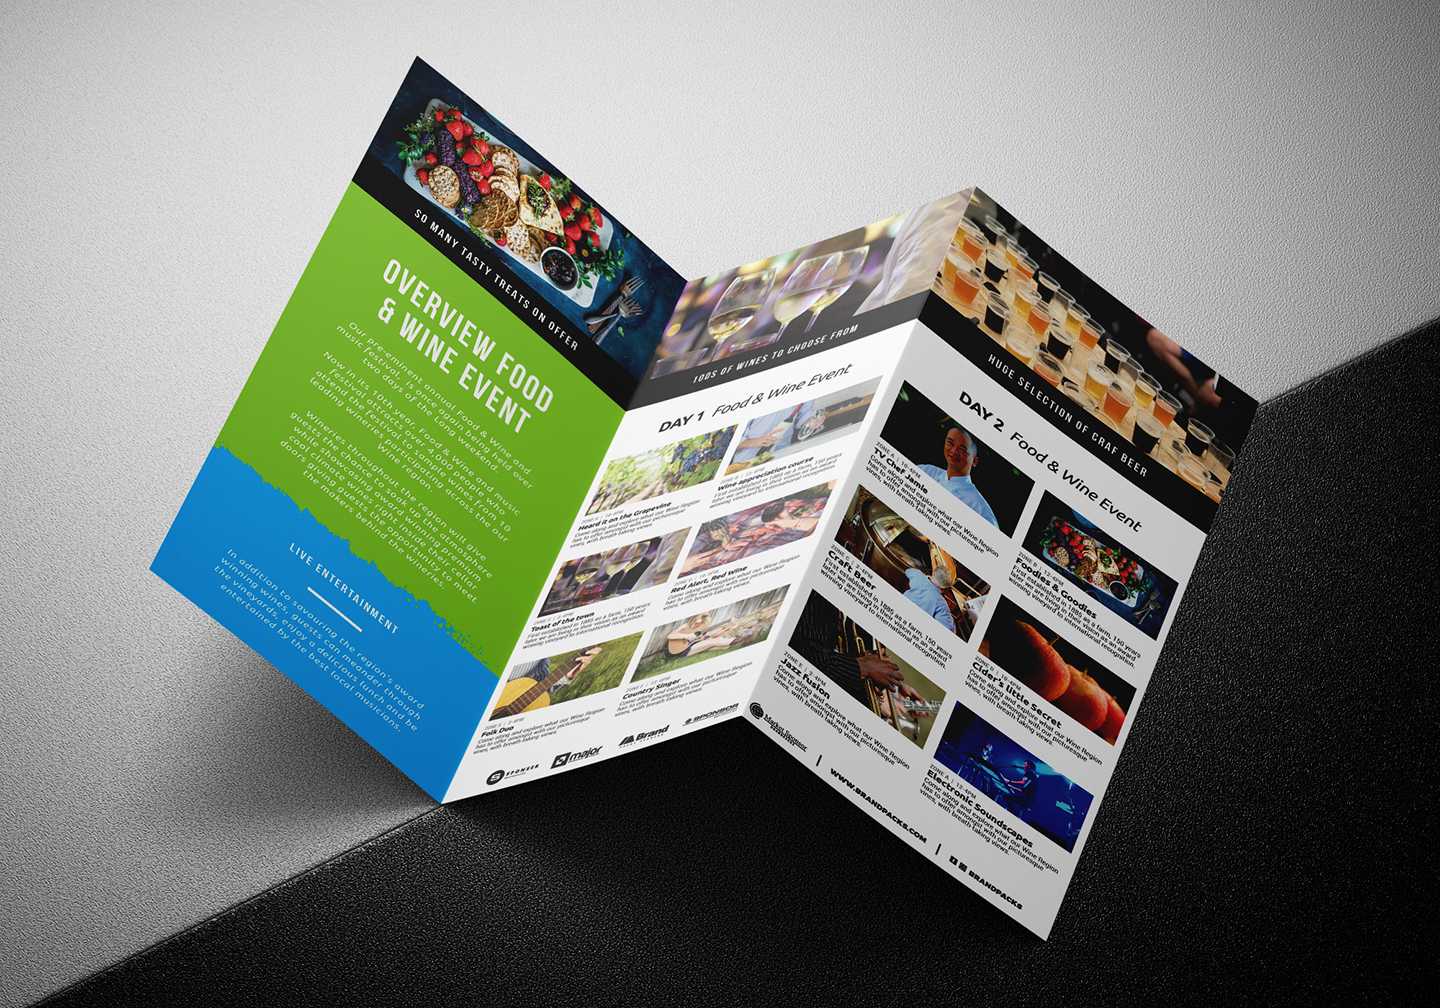 Free Tri Fold Brochure Template For Events & Festivals – Psd With Tri Fold Brochure Template Illustrator